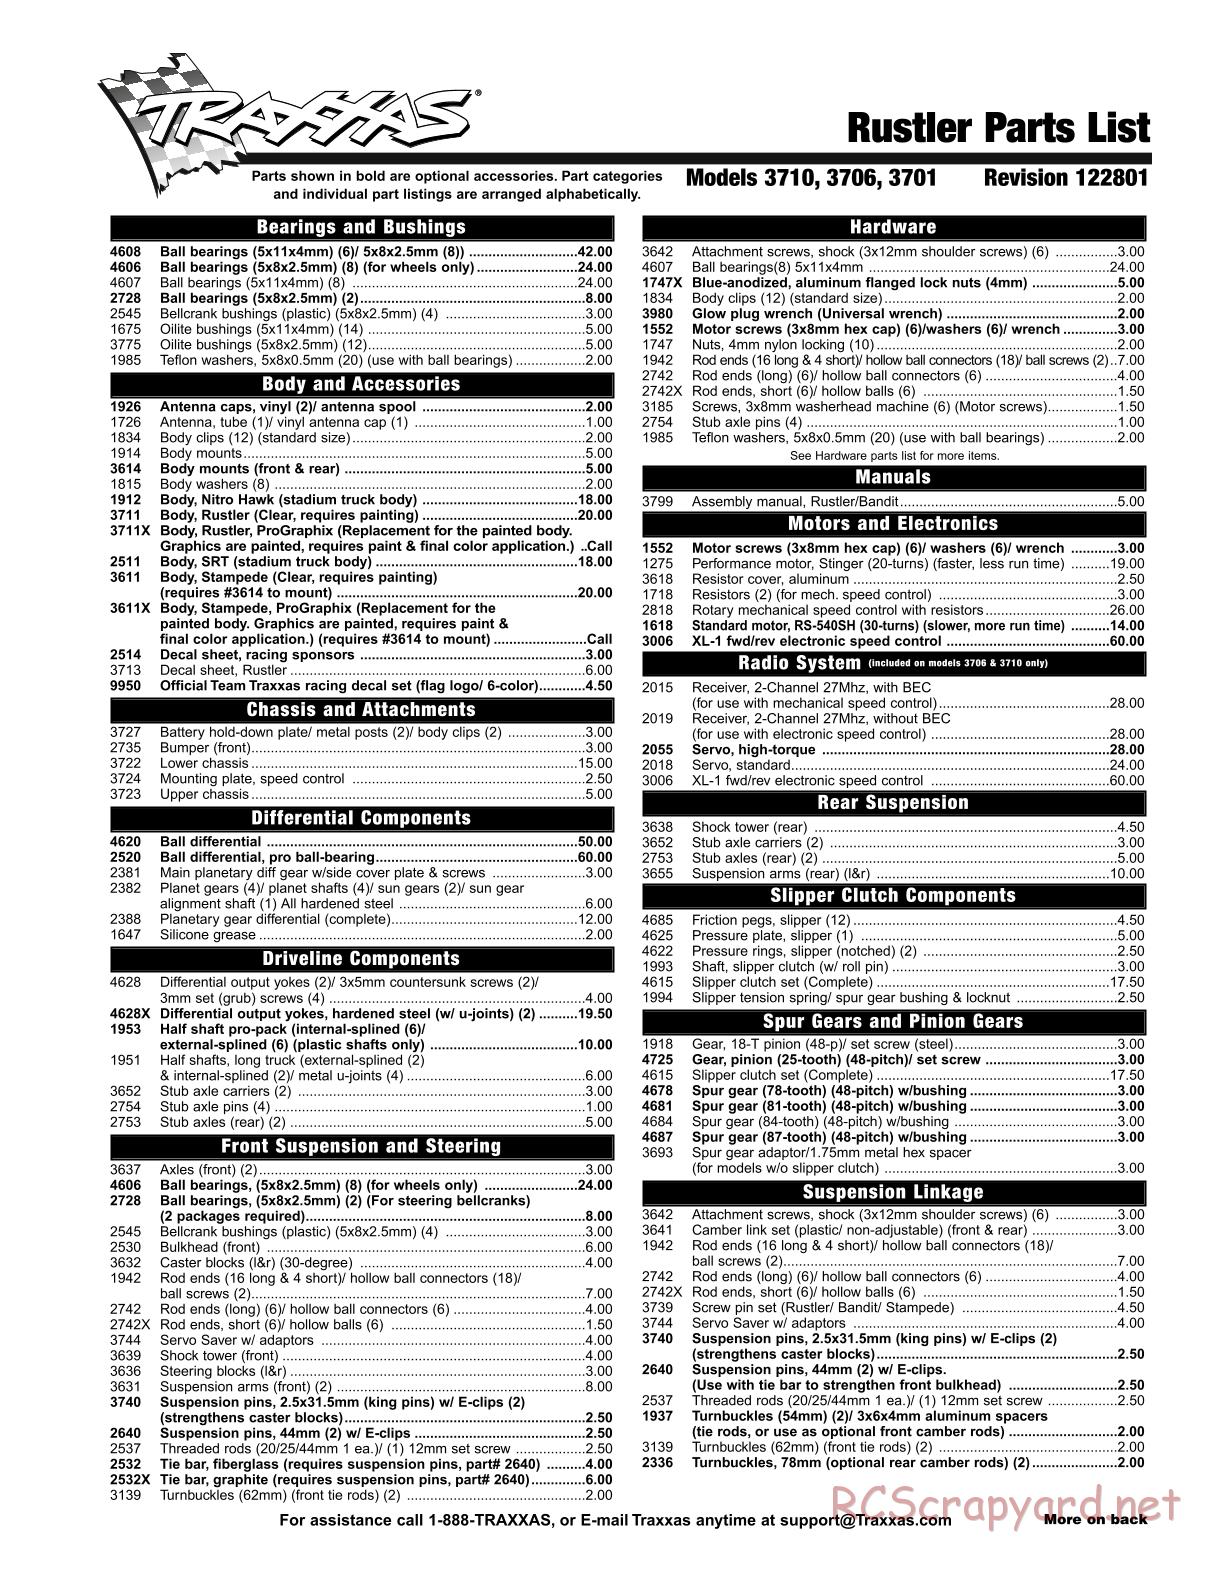 Traxxas - Rustler - Parts List - Page 1